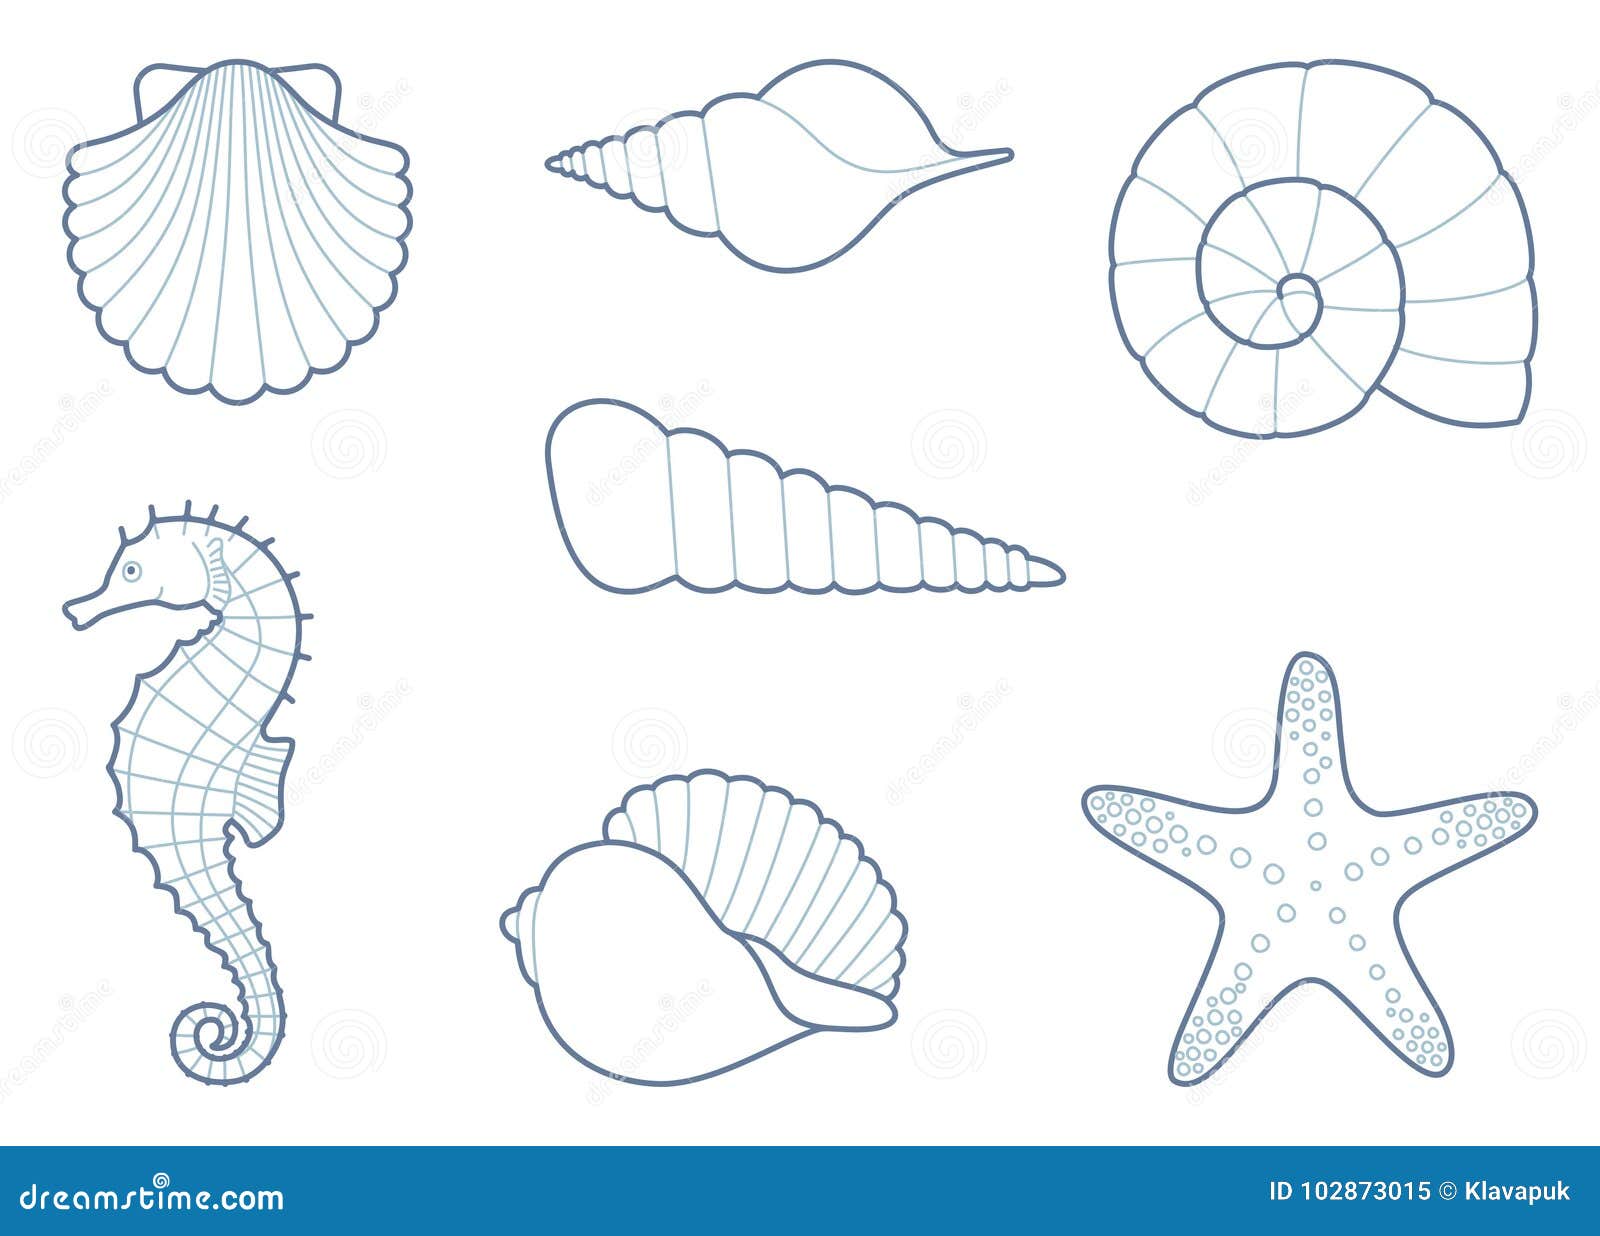 the outlines of sea creatures